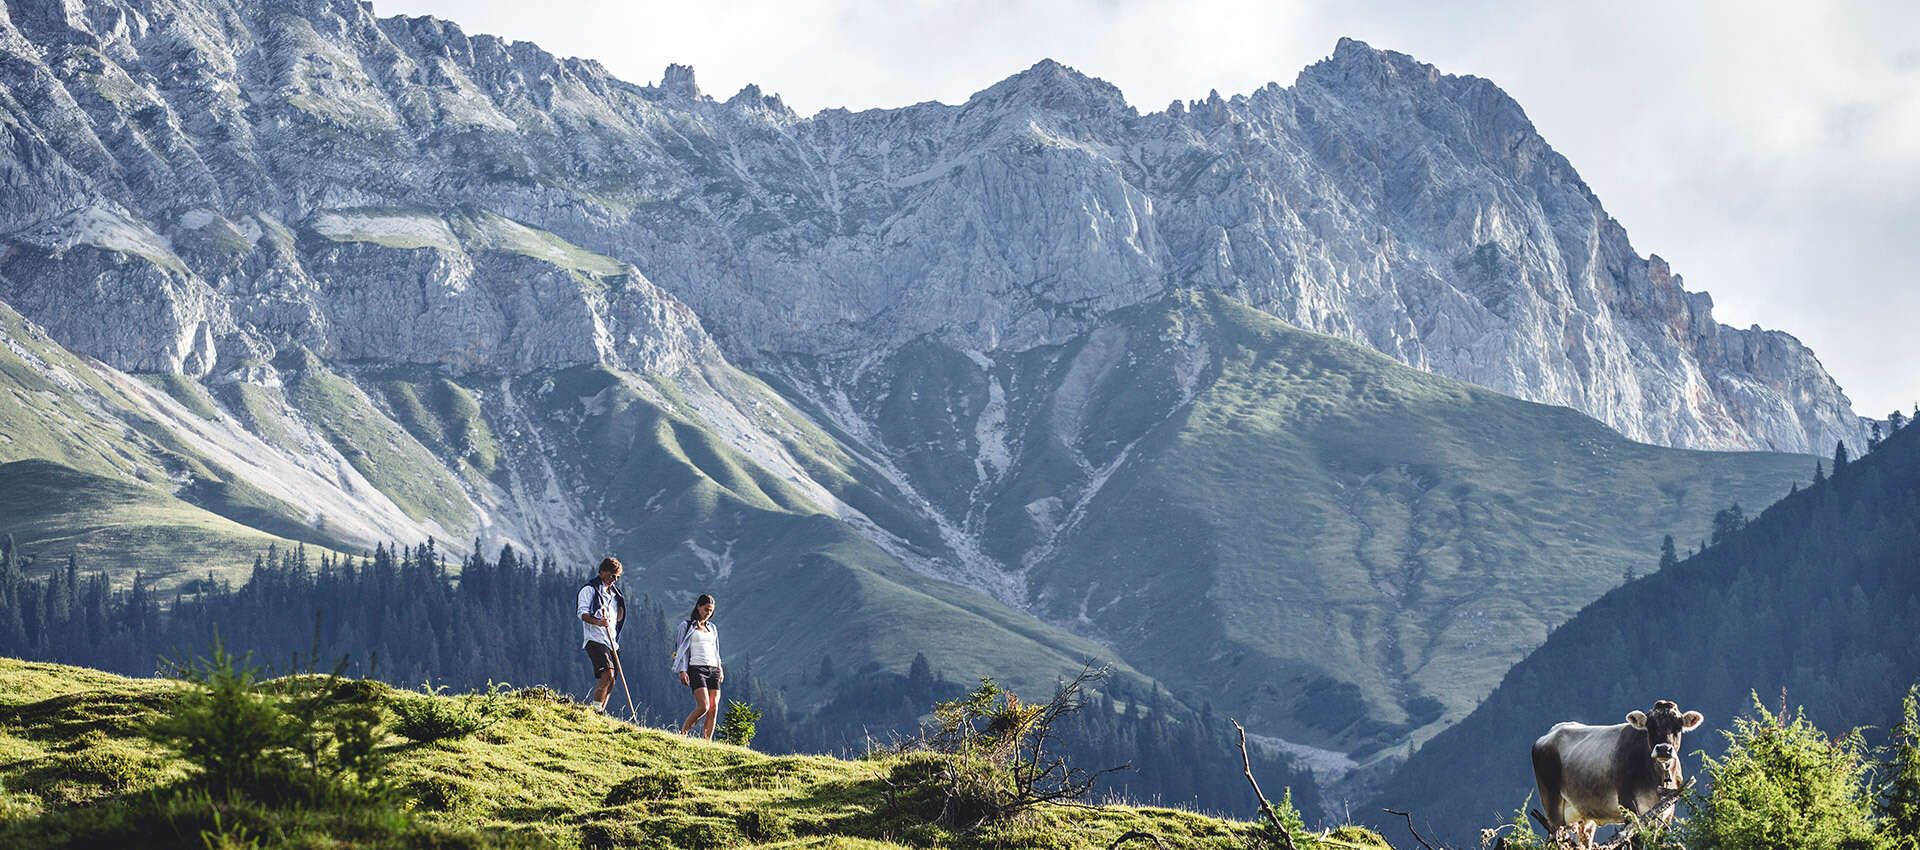 Hiking in the Tyrolean Alps